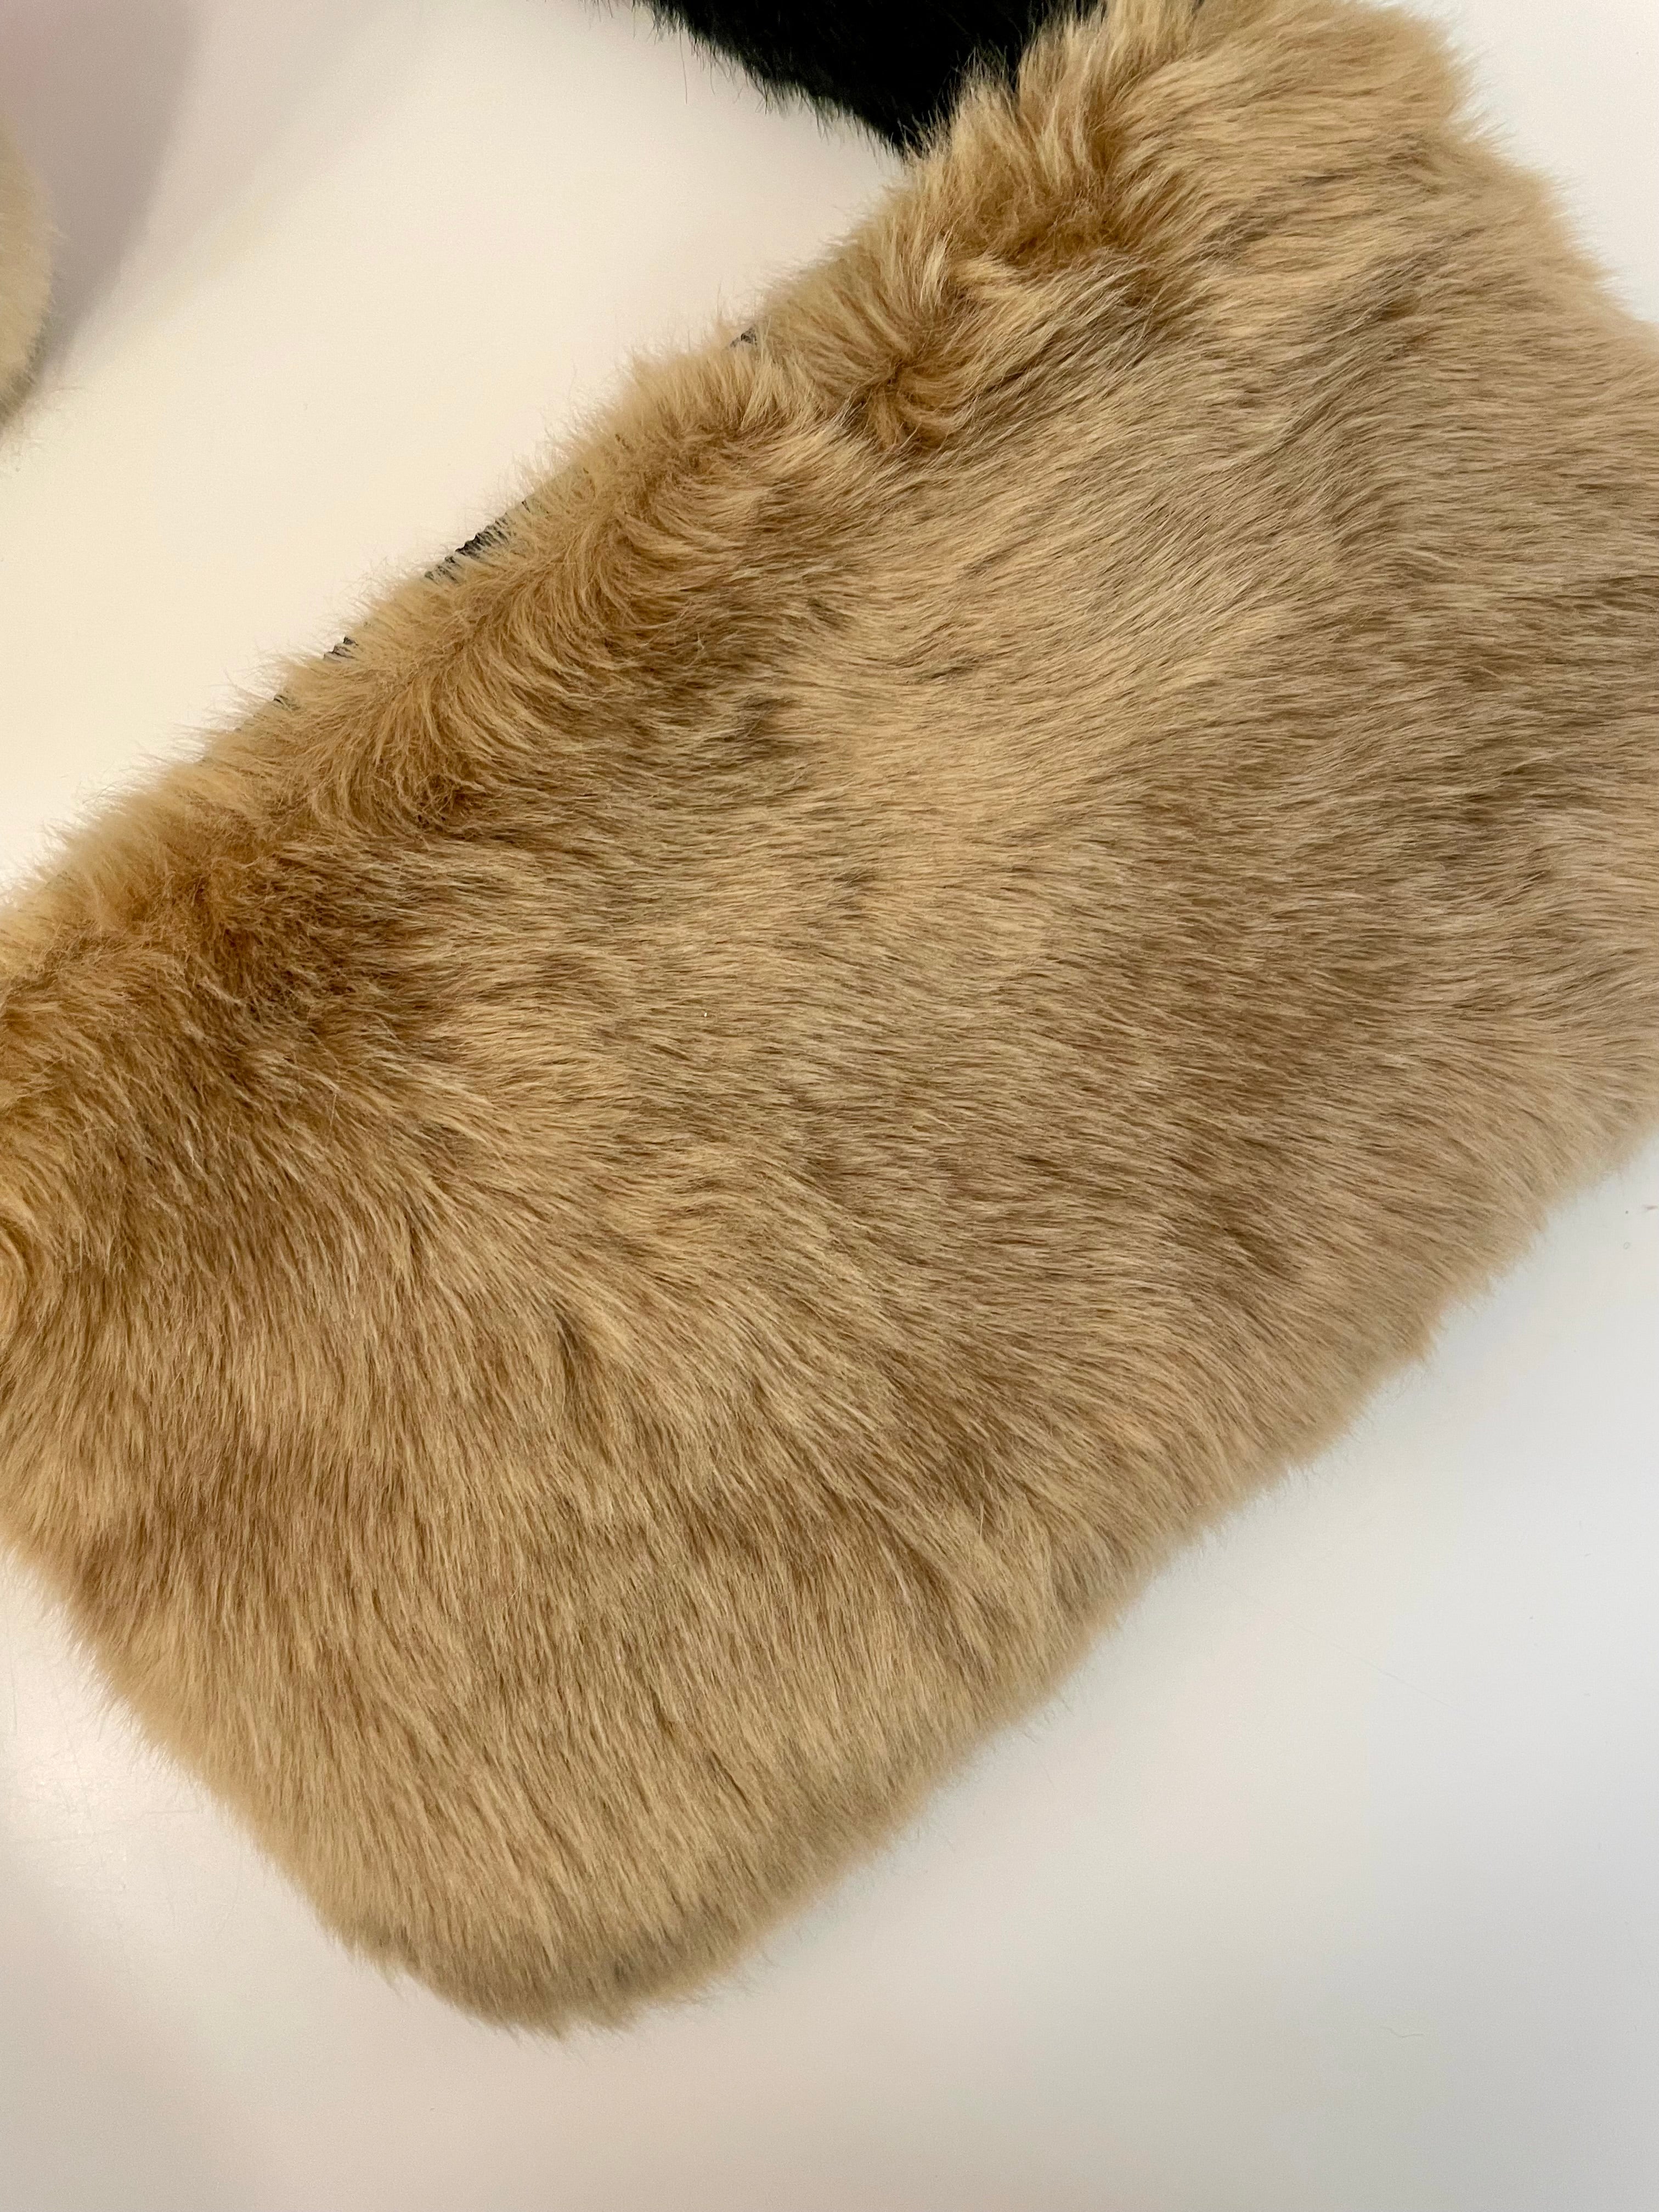 Ladies on Holiday adore a faux fur, glamorous evening bag!